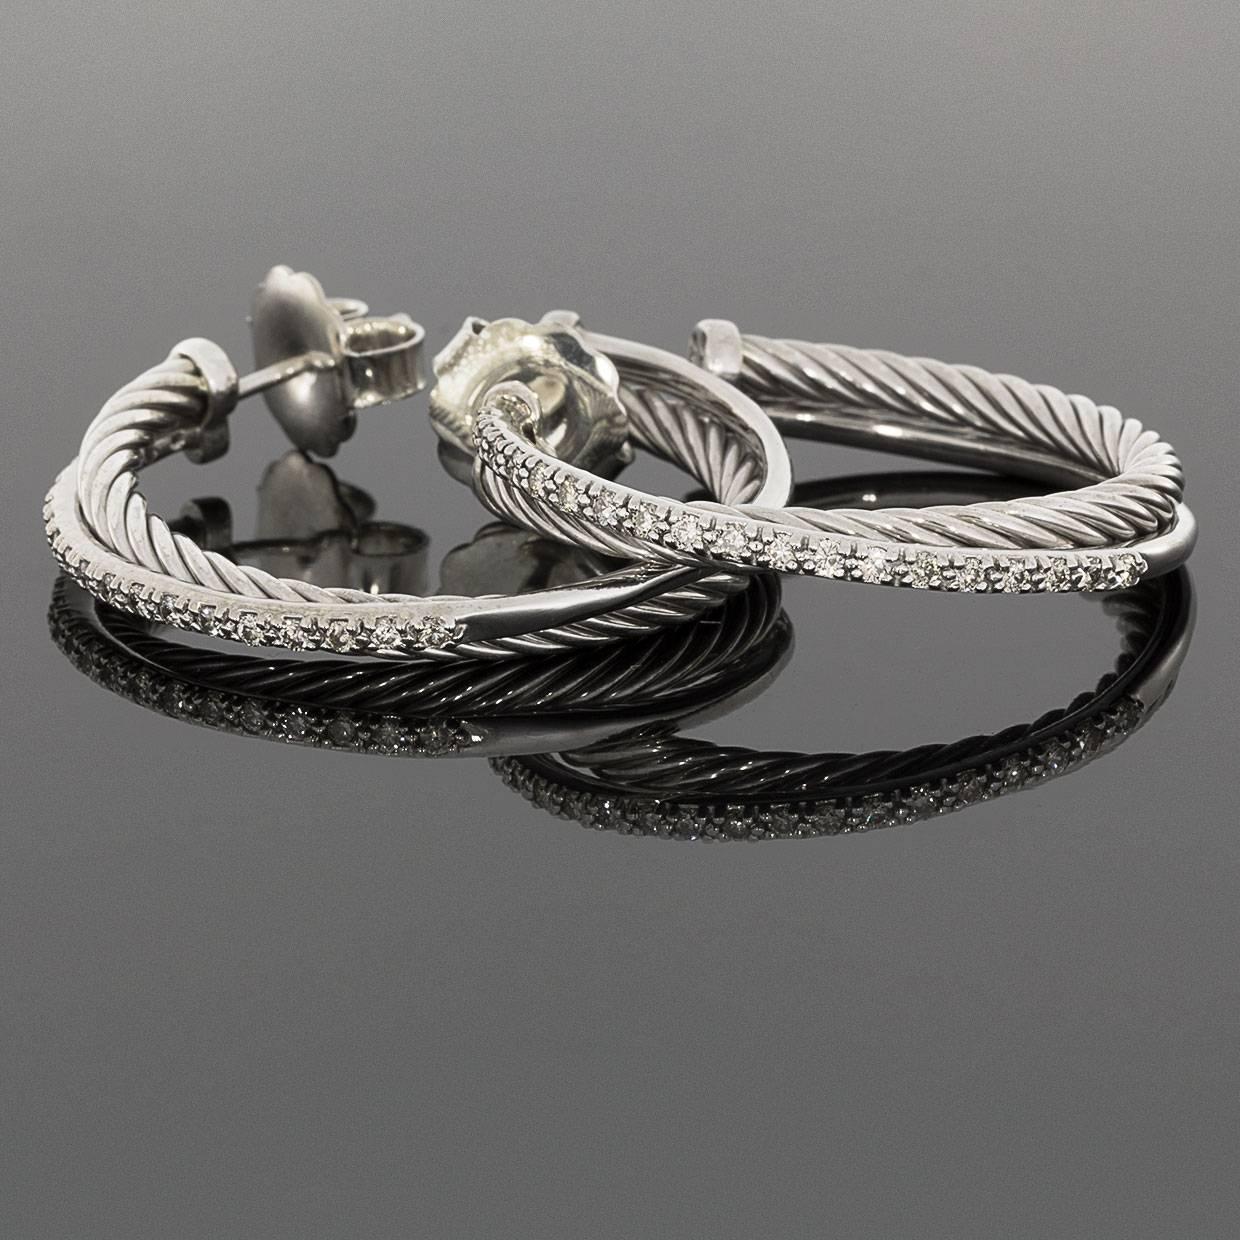 David Yurman's cable style jewelry has become his signature, the unifying element of every collection. These beautiful David Yurman Crossover Collection hoop earrings feature scintillating diamonds that have a combined total weight of .49 carat &